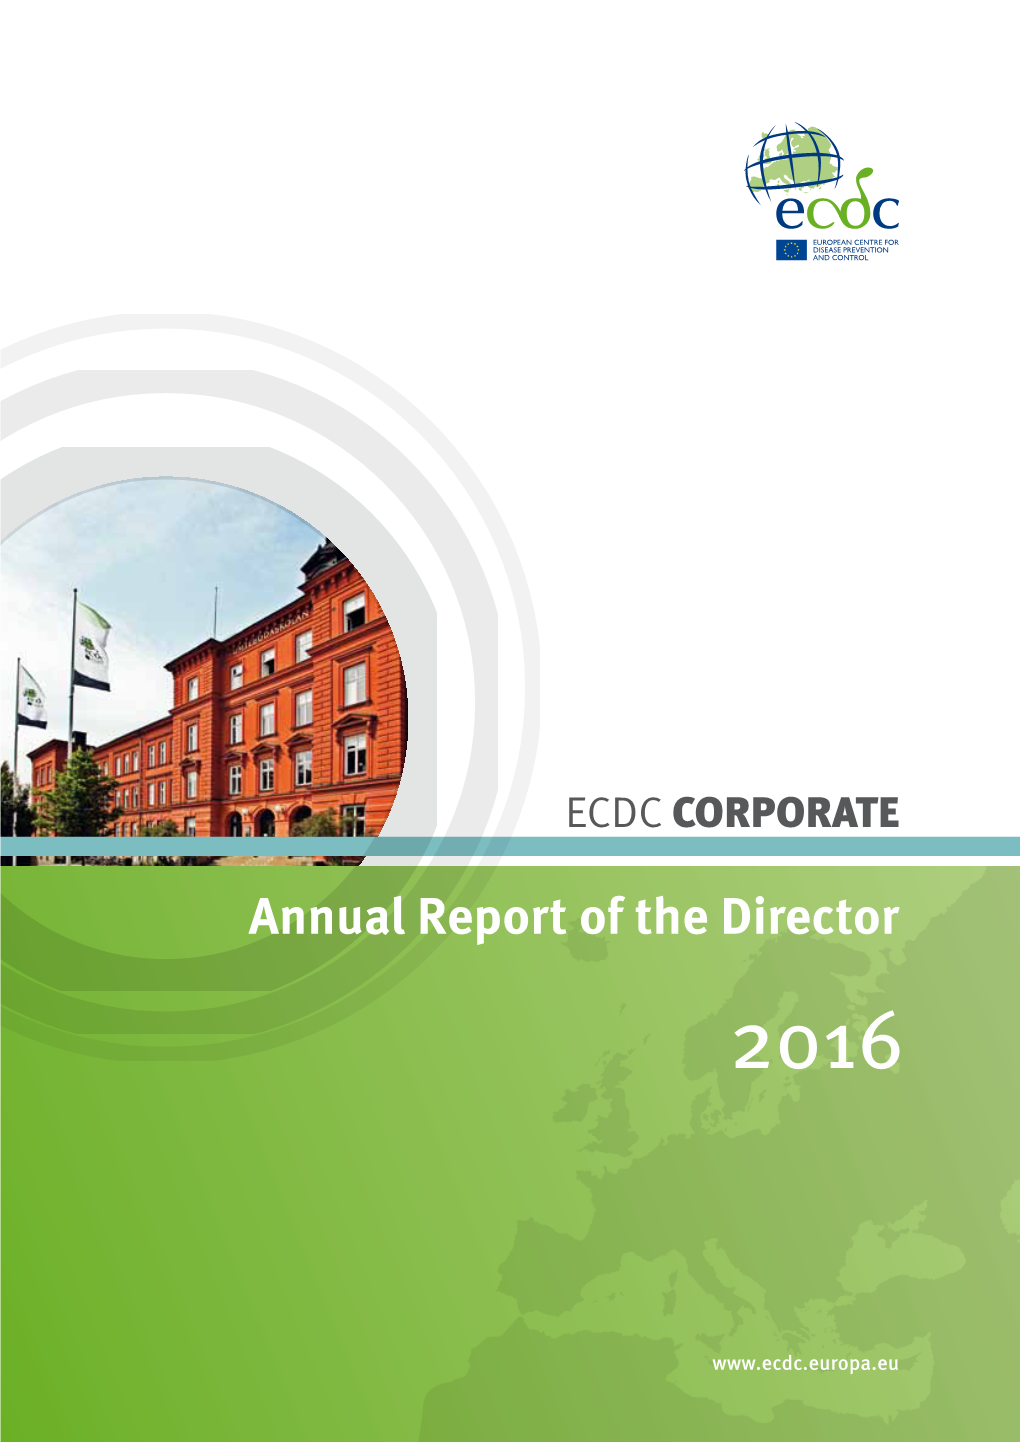 Annual Report of the Director, 2016